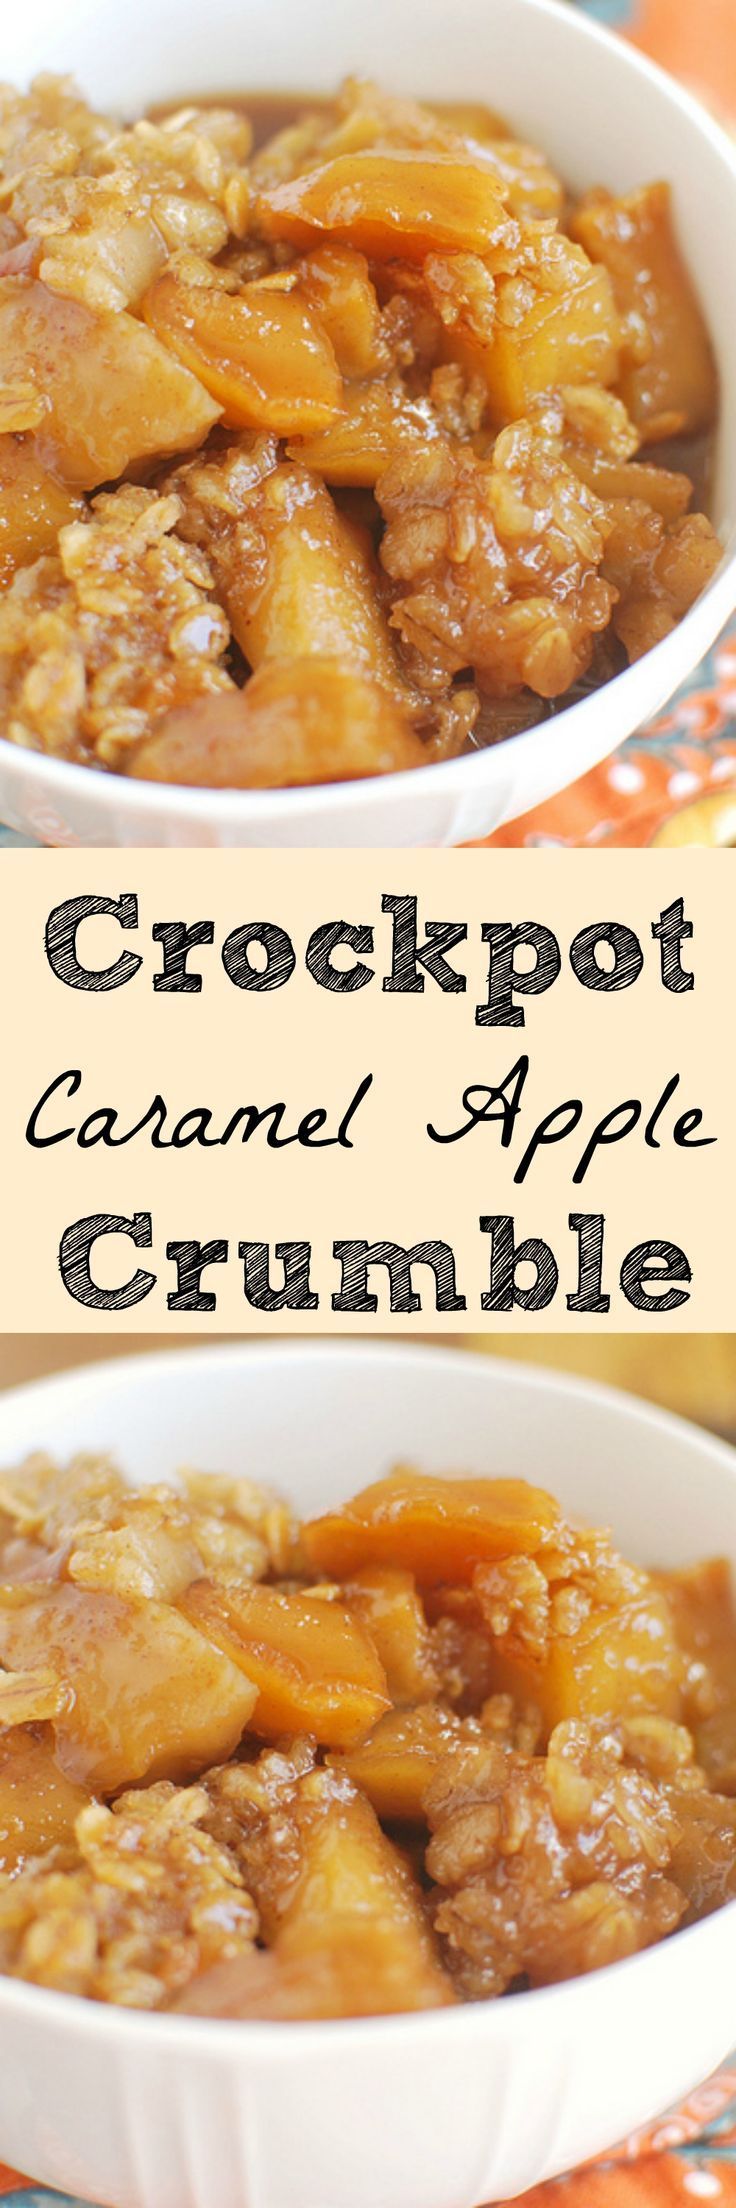 Crockpot Caramel Apple Crumble – the most delicious fall dessert! And it’s made in the crockpot!